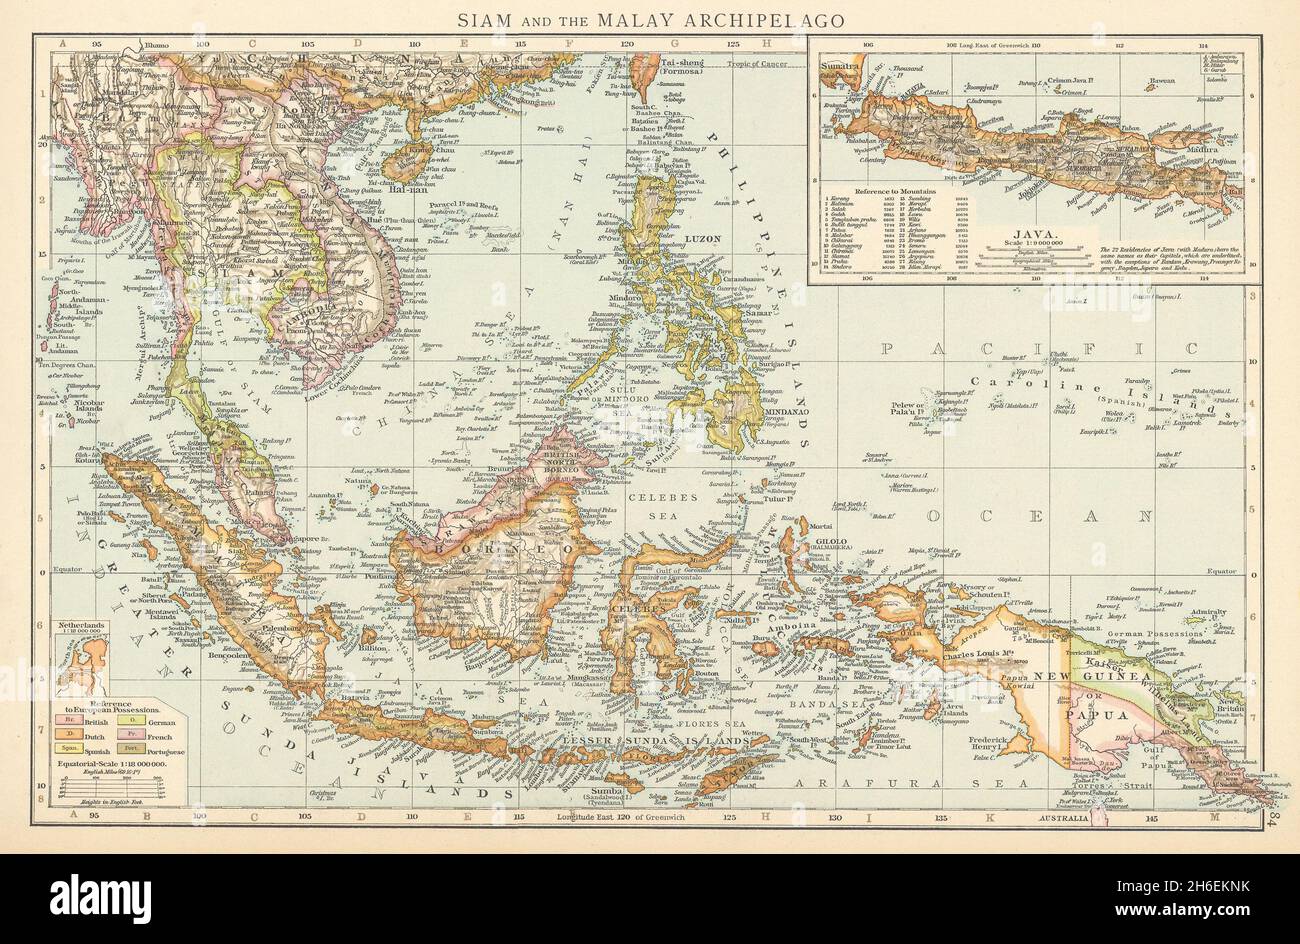 Siam and the Malay Archipelago. Indonesia Indochina Philippines. TIMES 1895 map Stock Photo